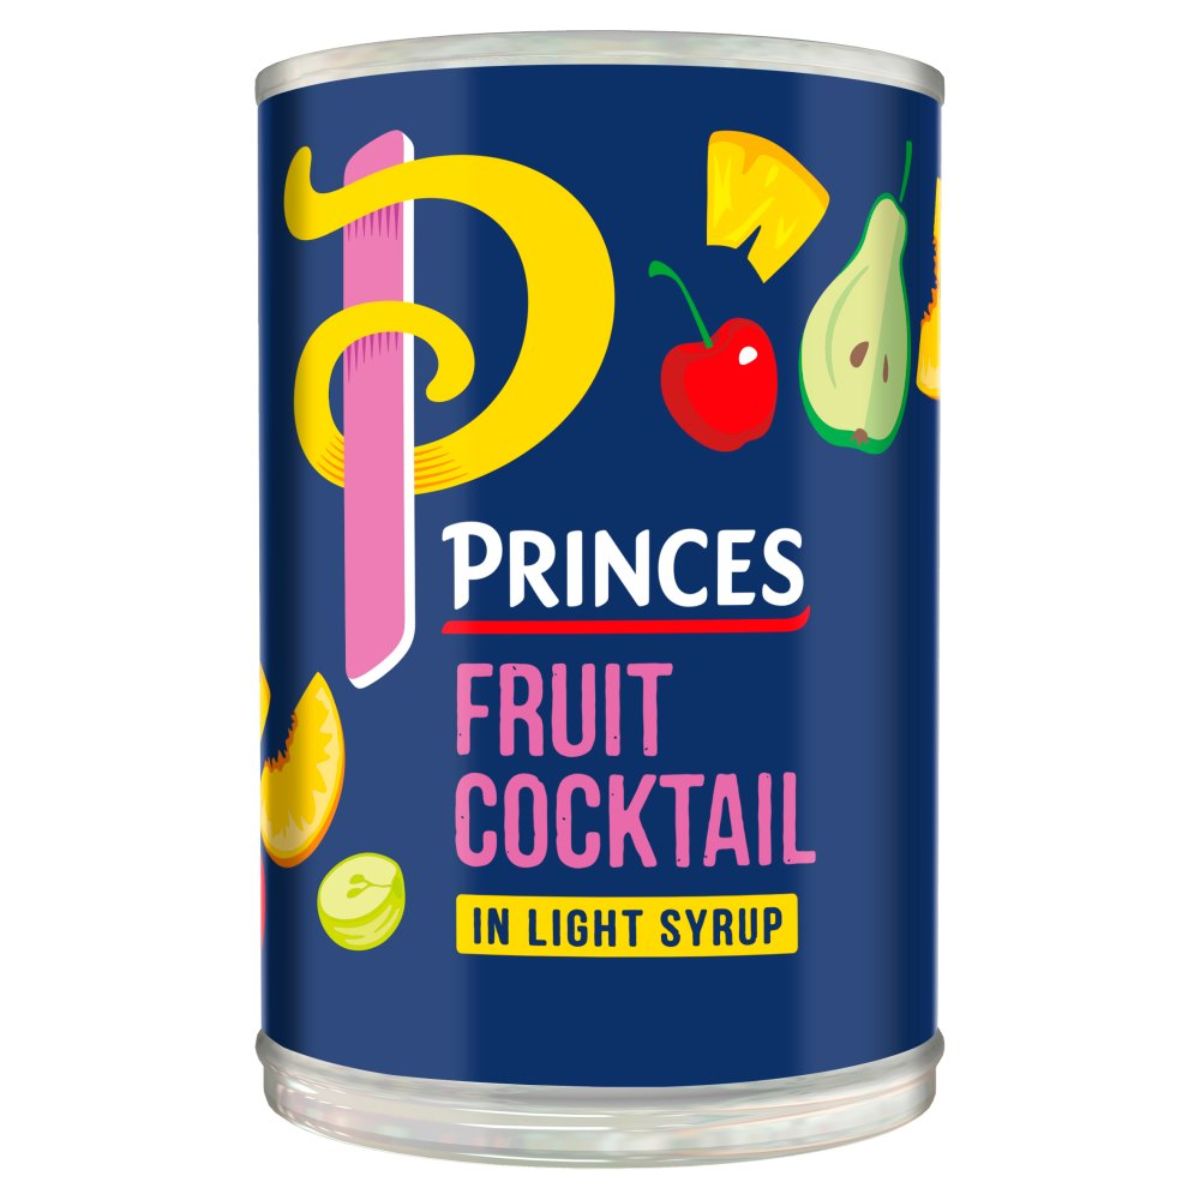 Princes - Fruit Cocktail in Light Syrup - 410g.